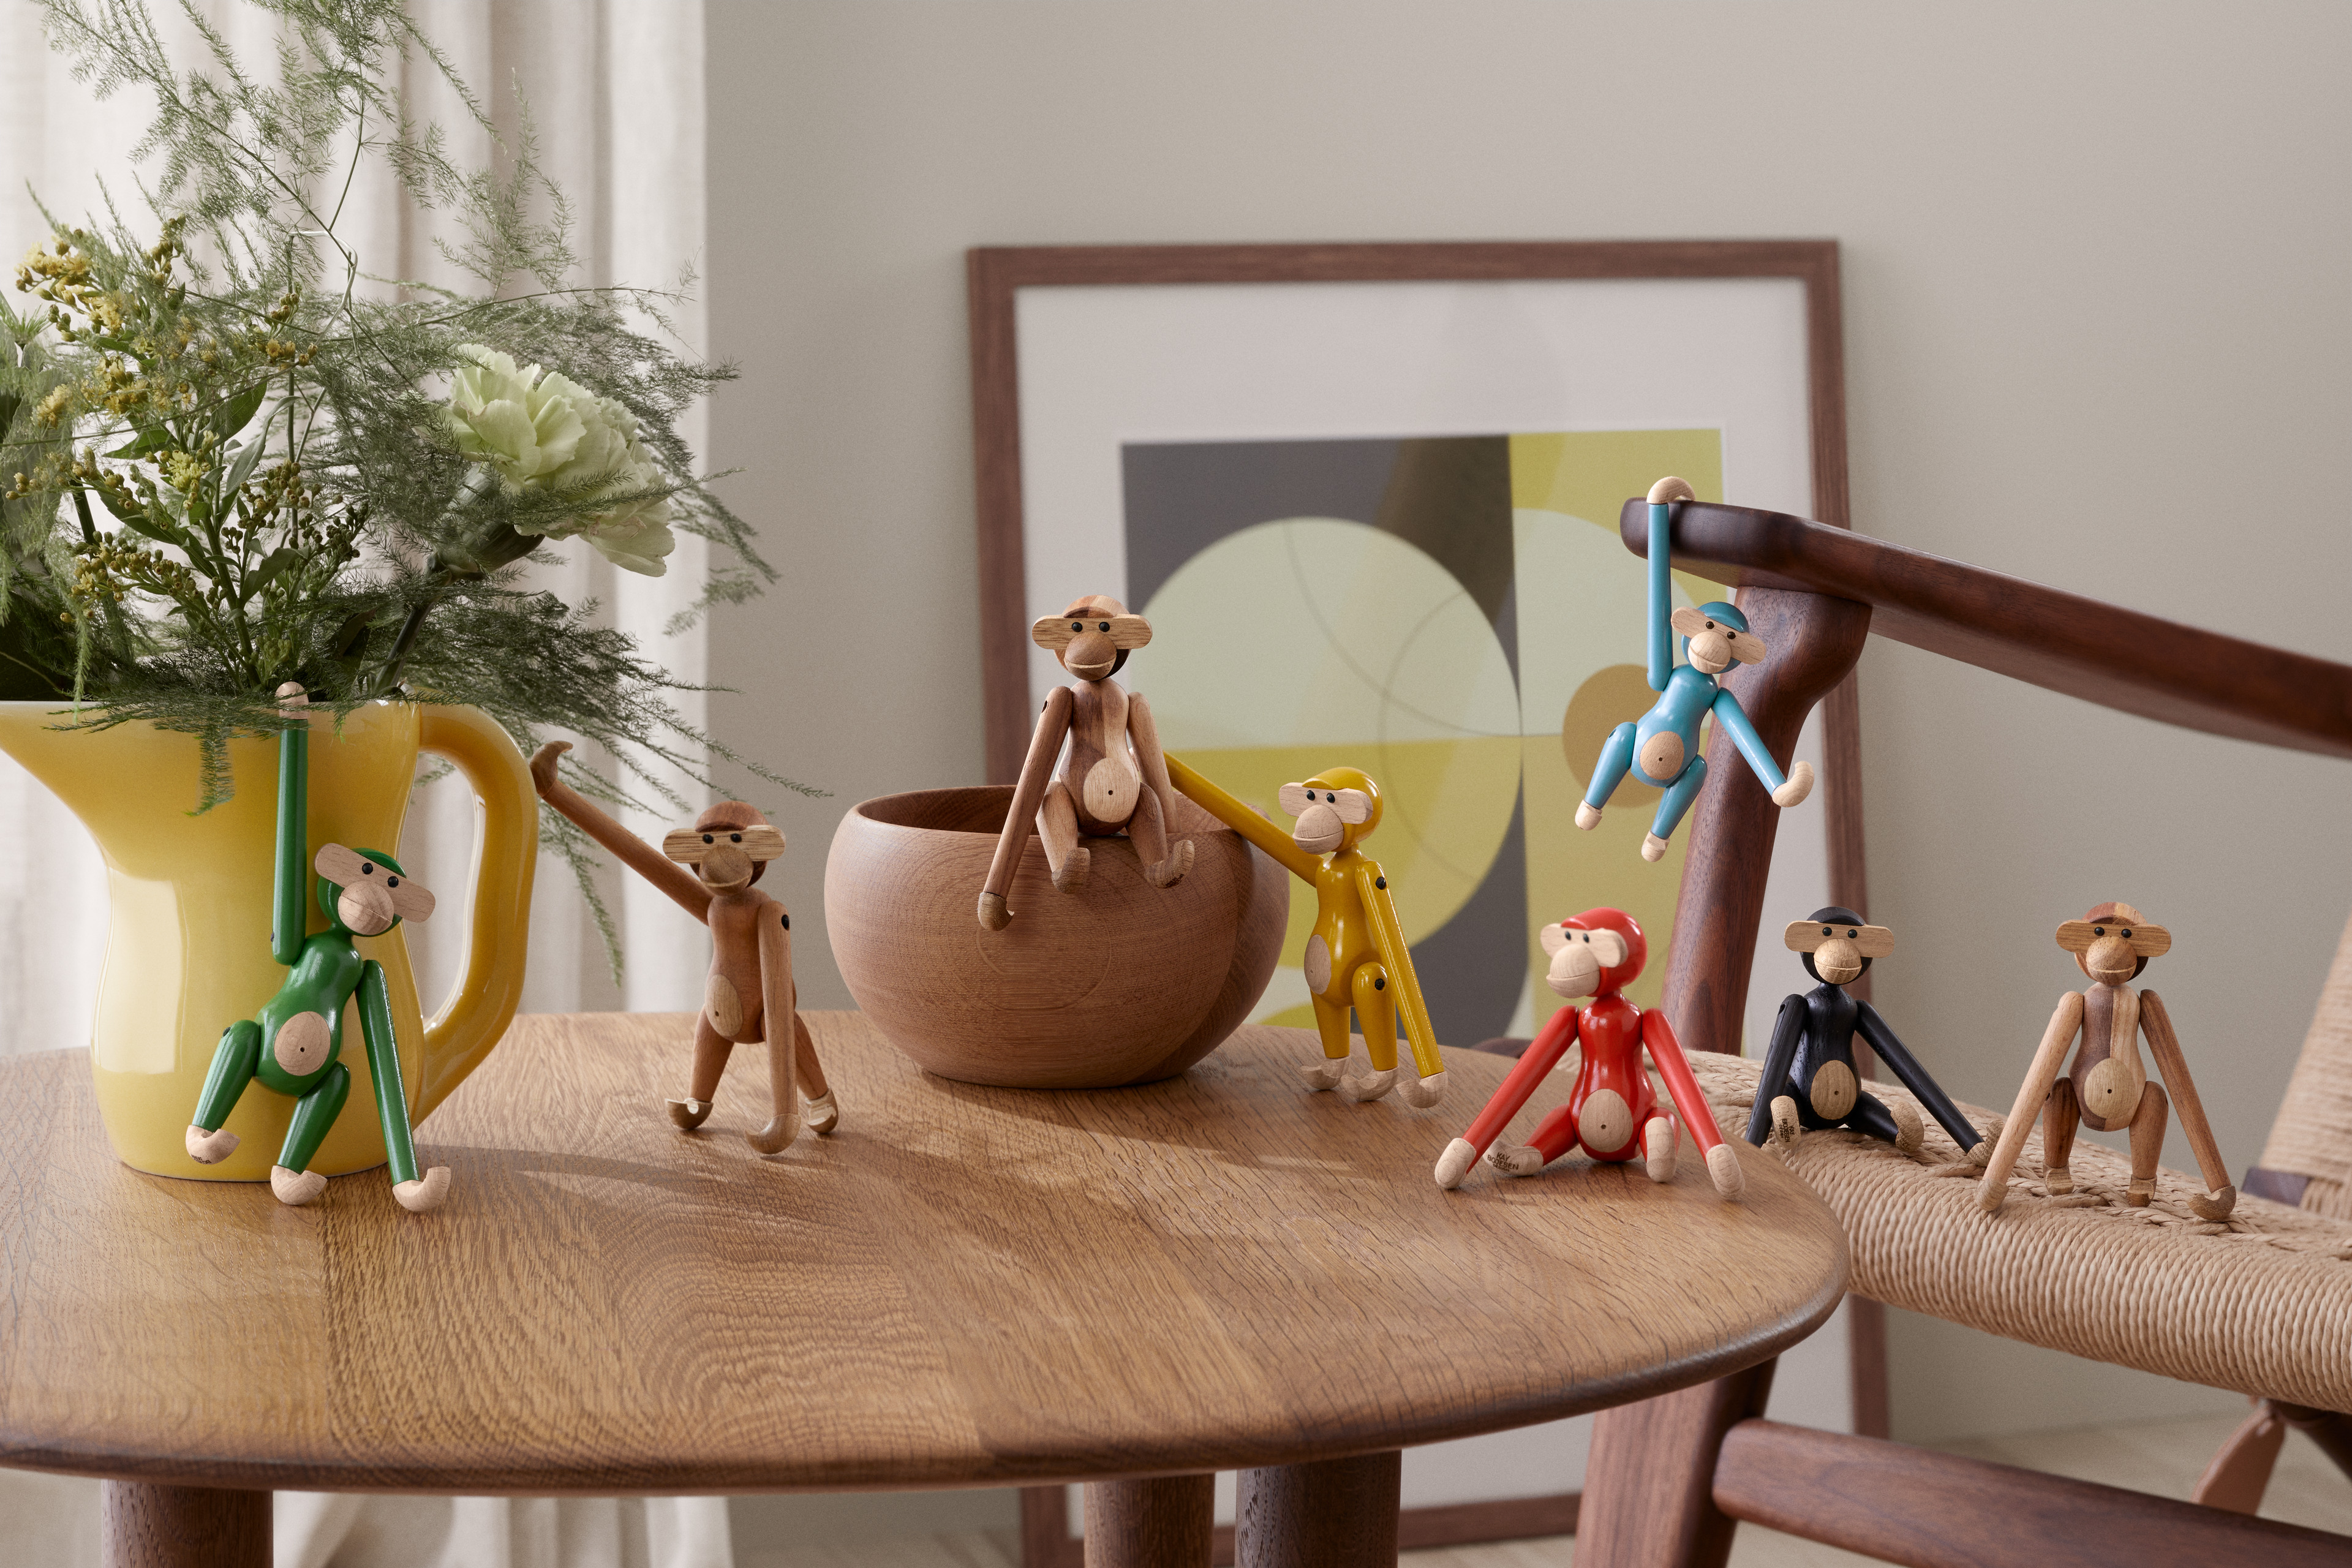  Five monkeys in recycled wood from Kay Bojesen